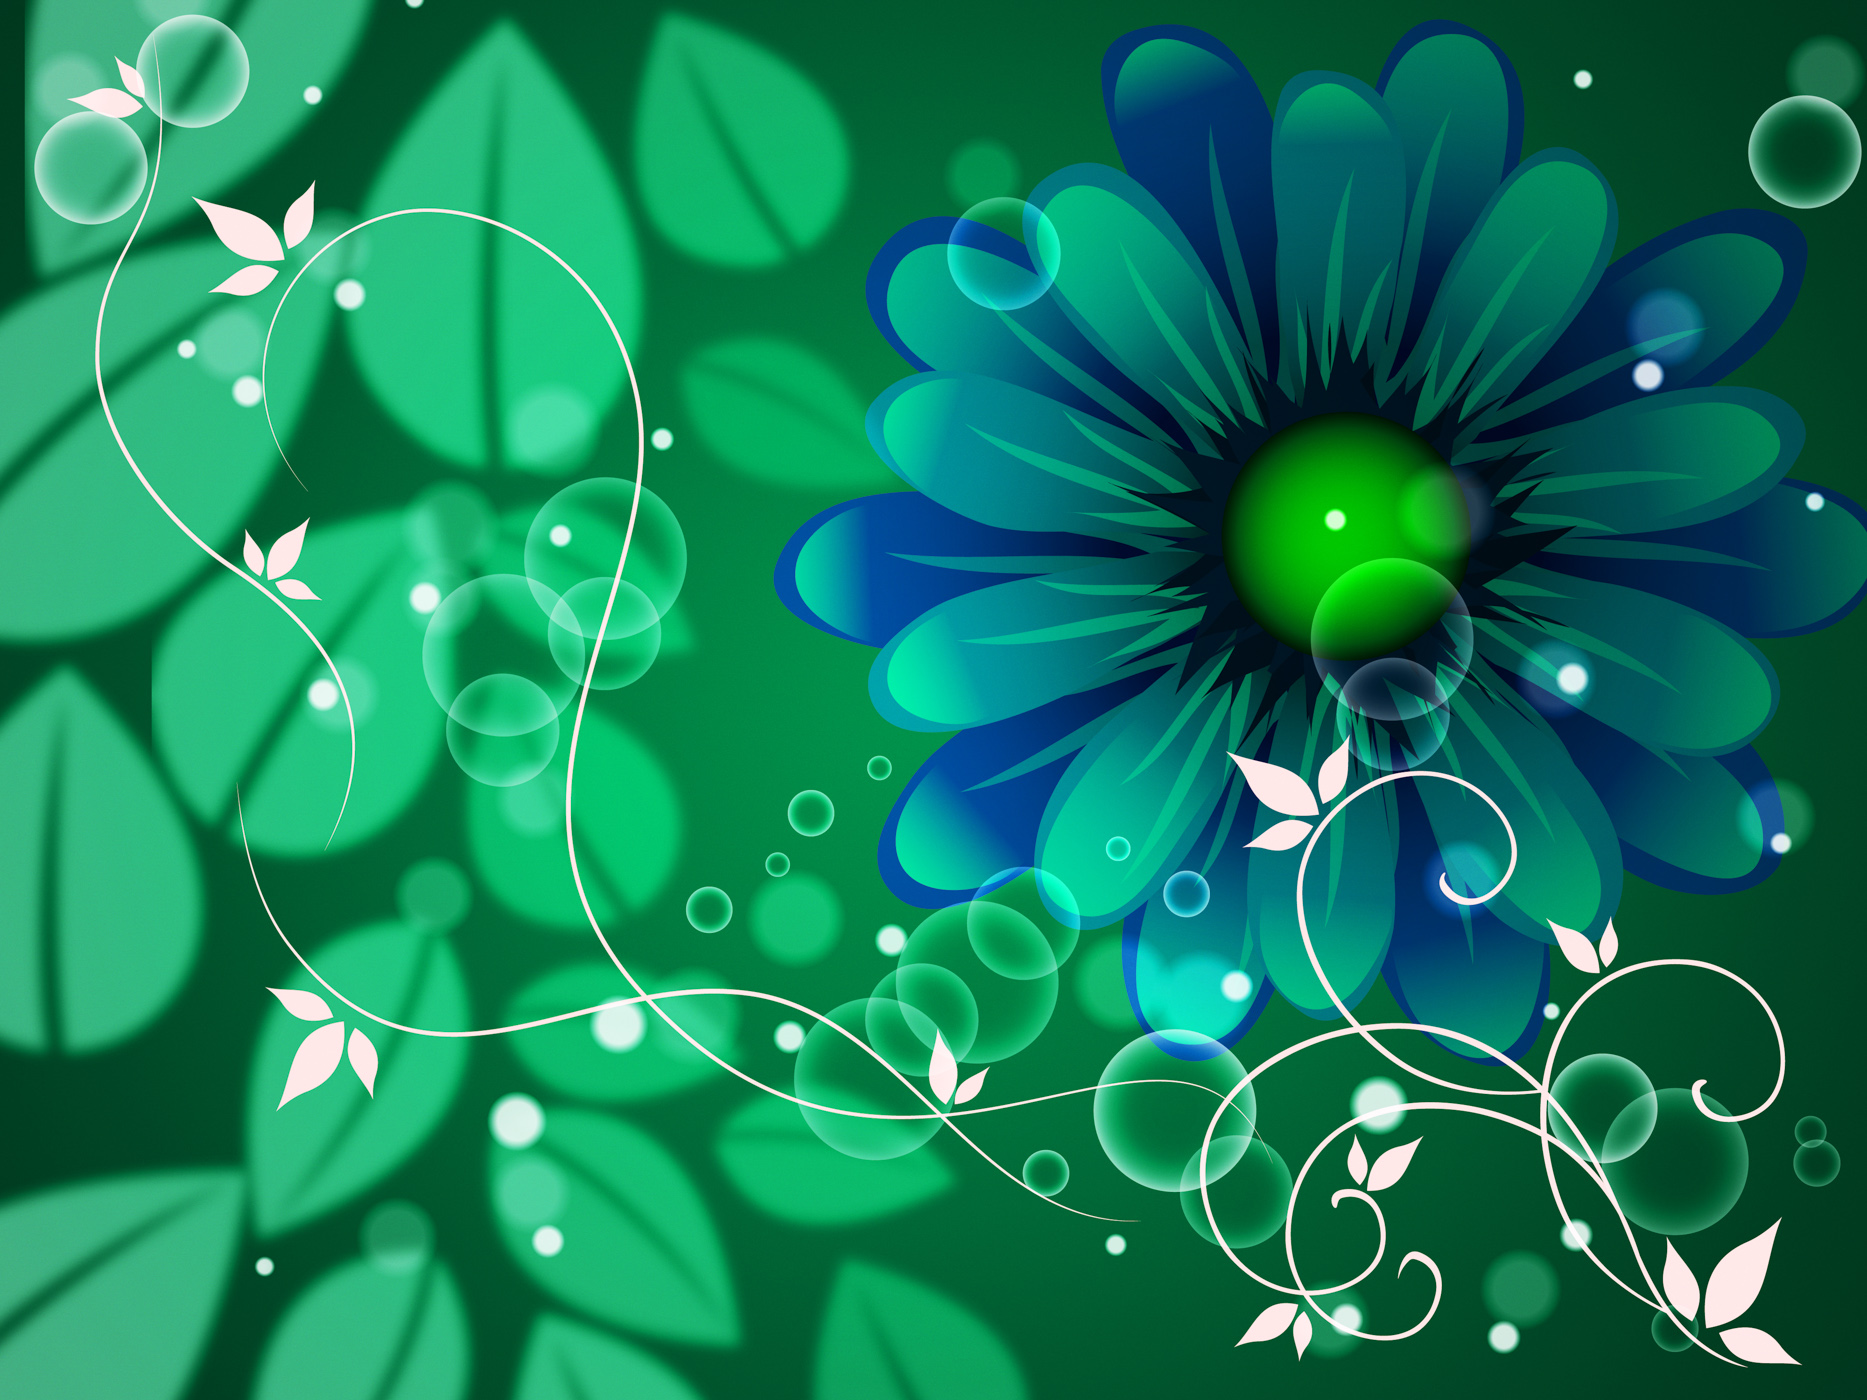 Leaves background means petals blooming and floral photo